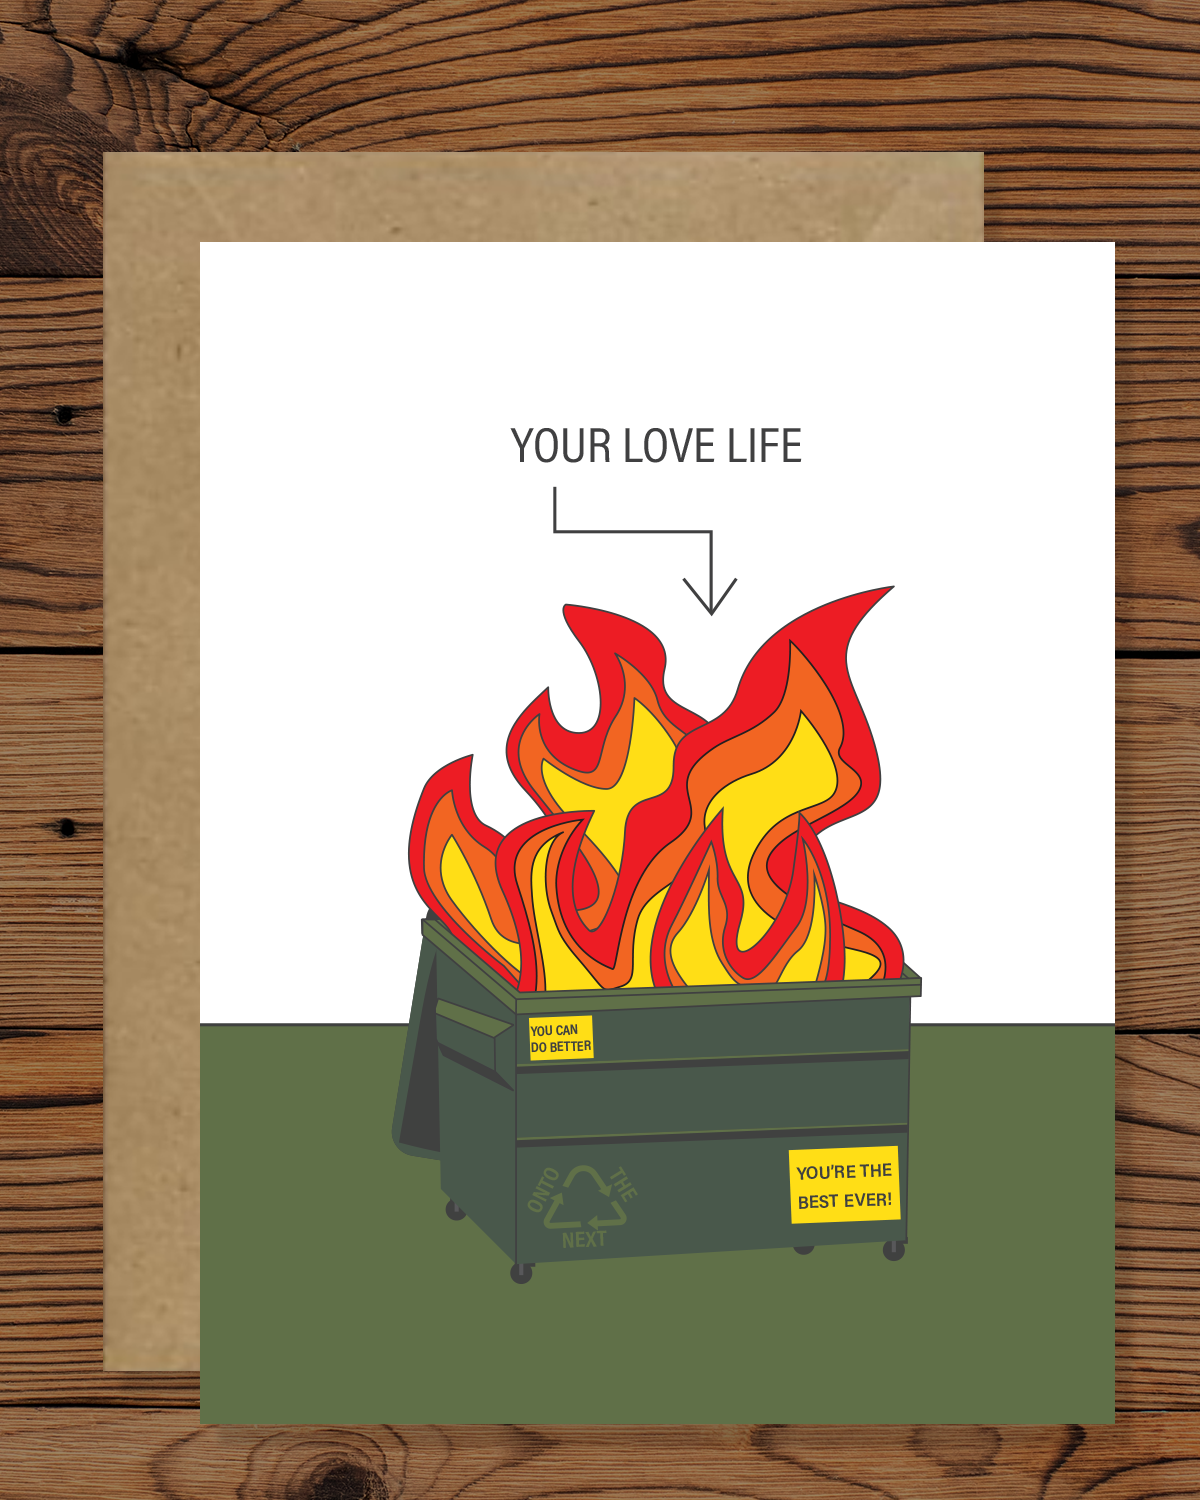 Your love life is a dumpster fire